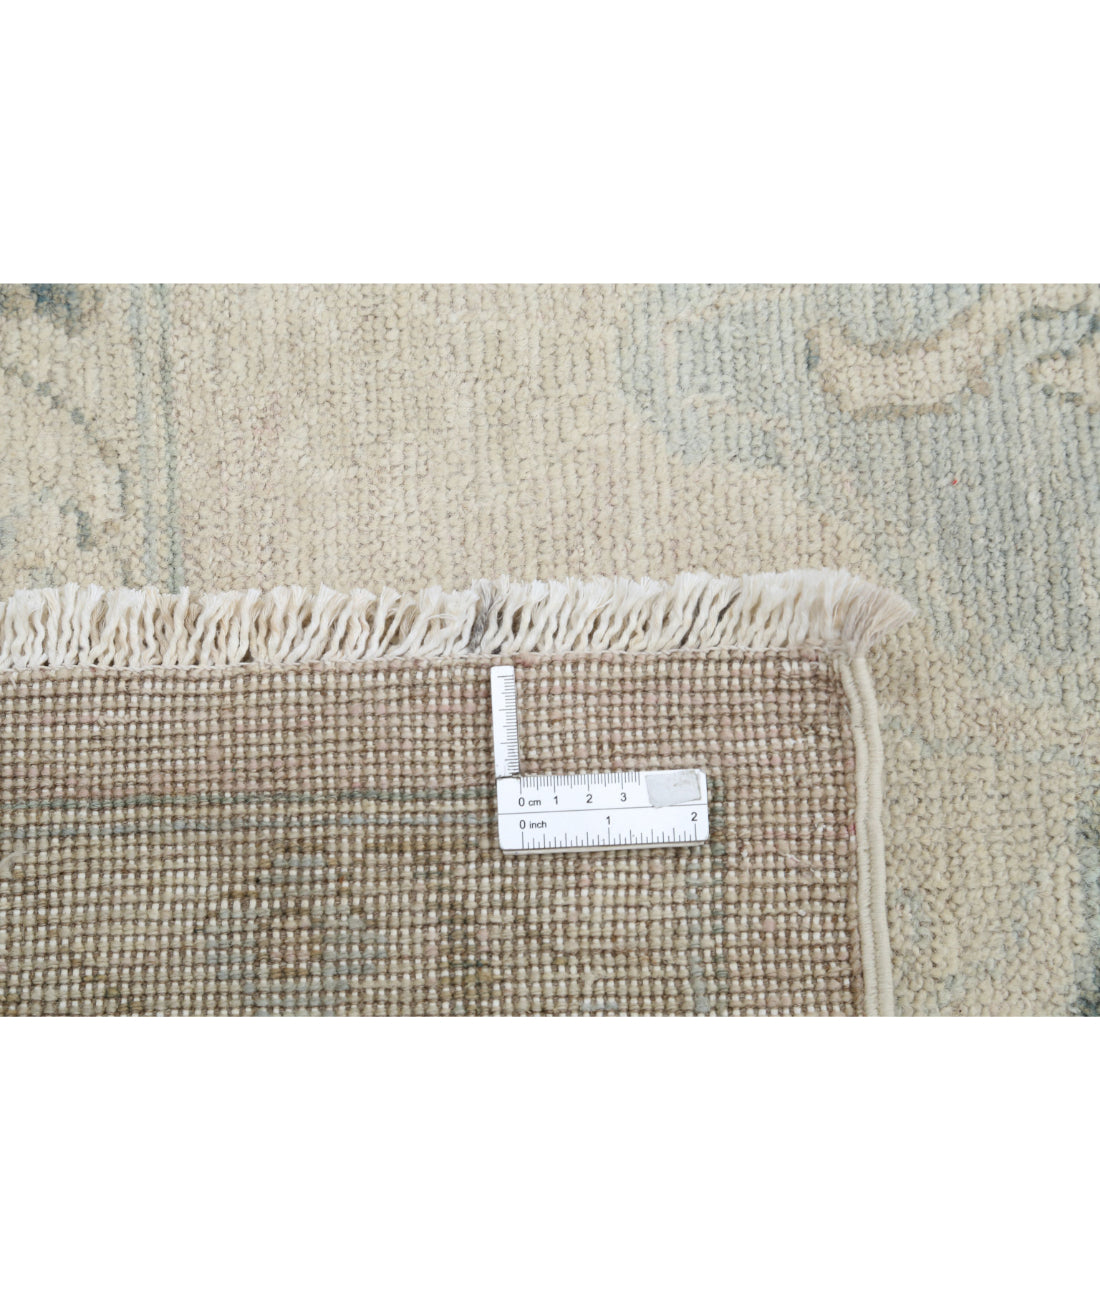 Hand Knotted Oushak Wool Rug - 11'8'' x 14'10'' 11'8'' x 14'10'' (350 X 445) / Beige / Blue